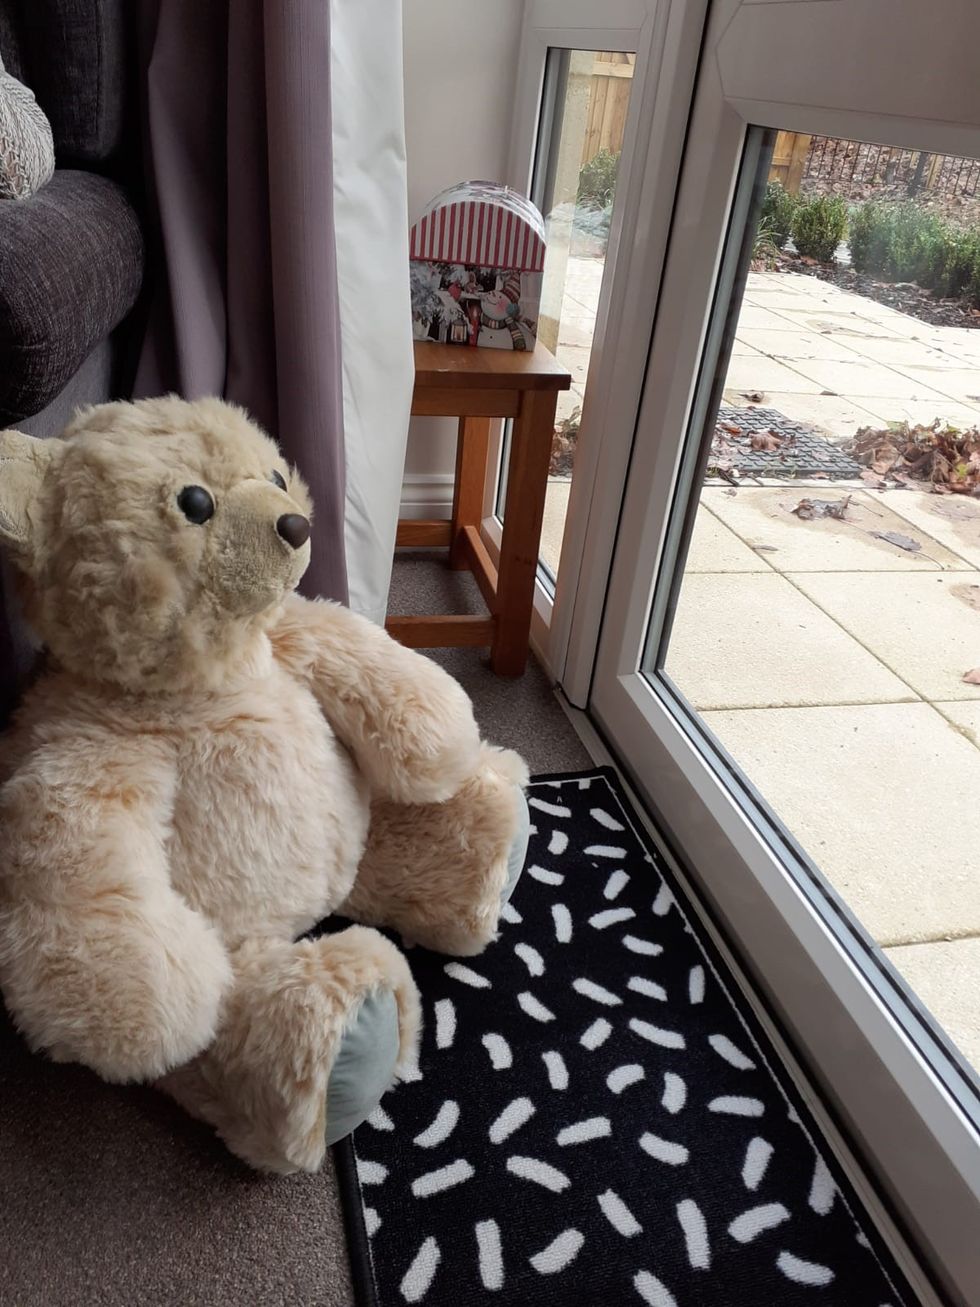 Teddy bear lovingly restored after washing up on beach in storm